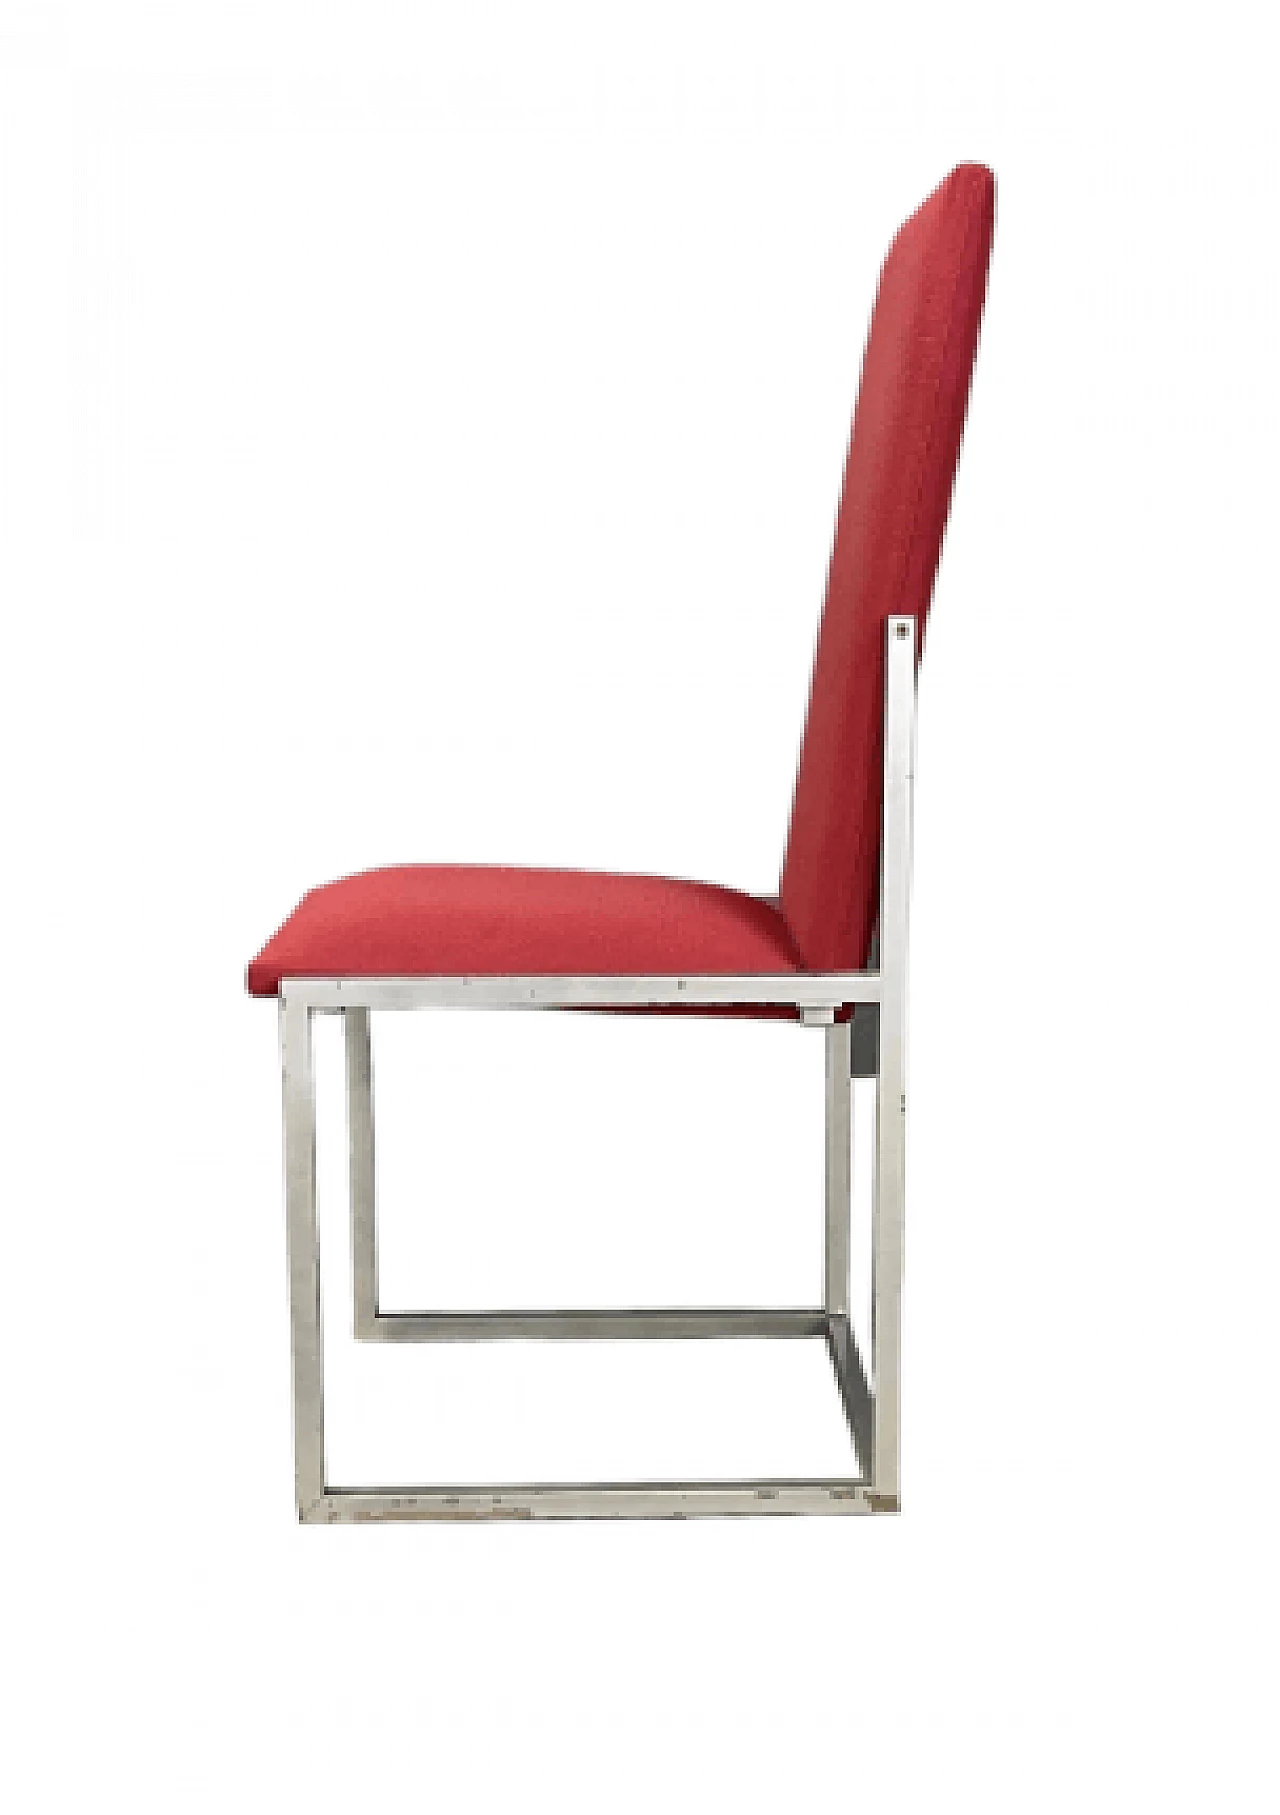 8 Chairs in nickel-plated metal and red fabric by Turri, 1970s 6